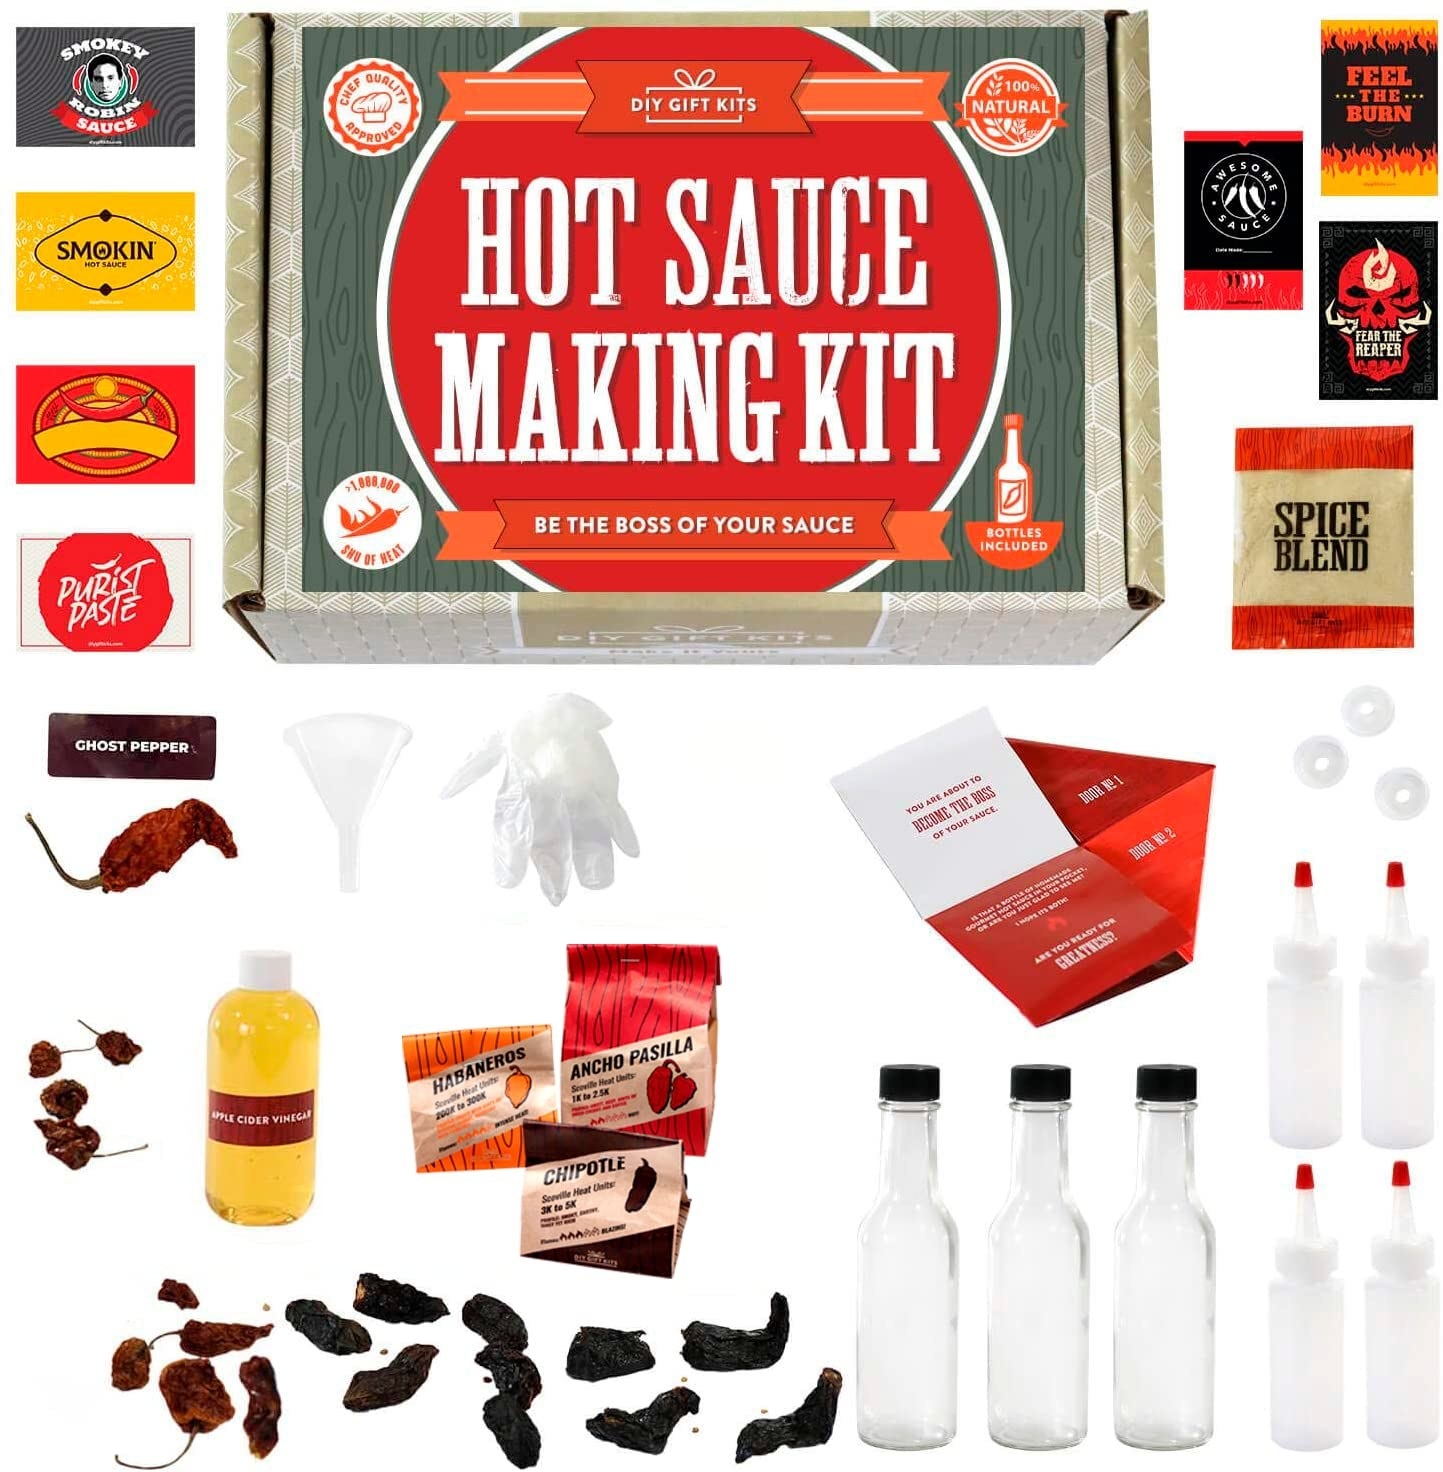 hot sauce making kit with bottles, dried peppers, spice blends, etc